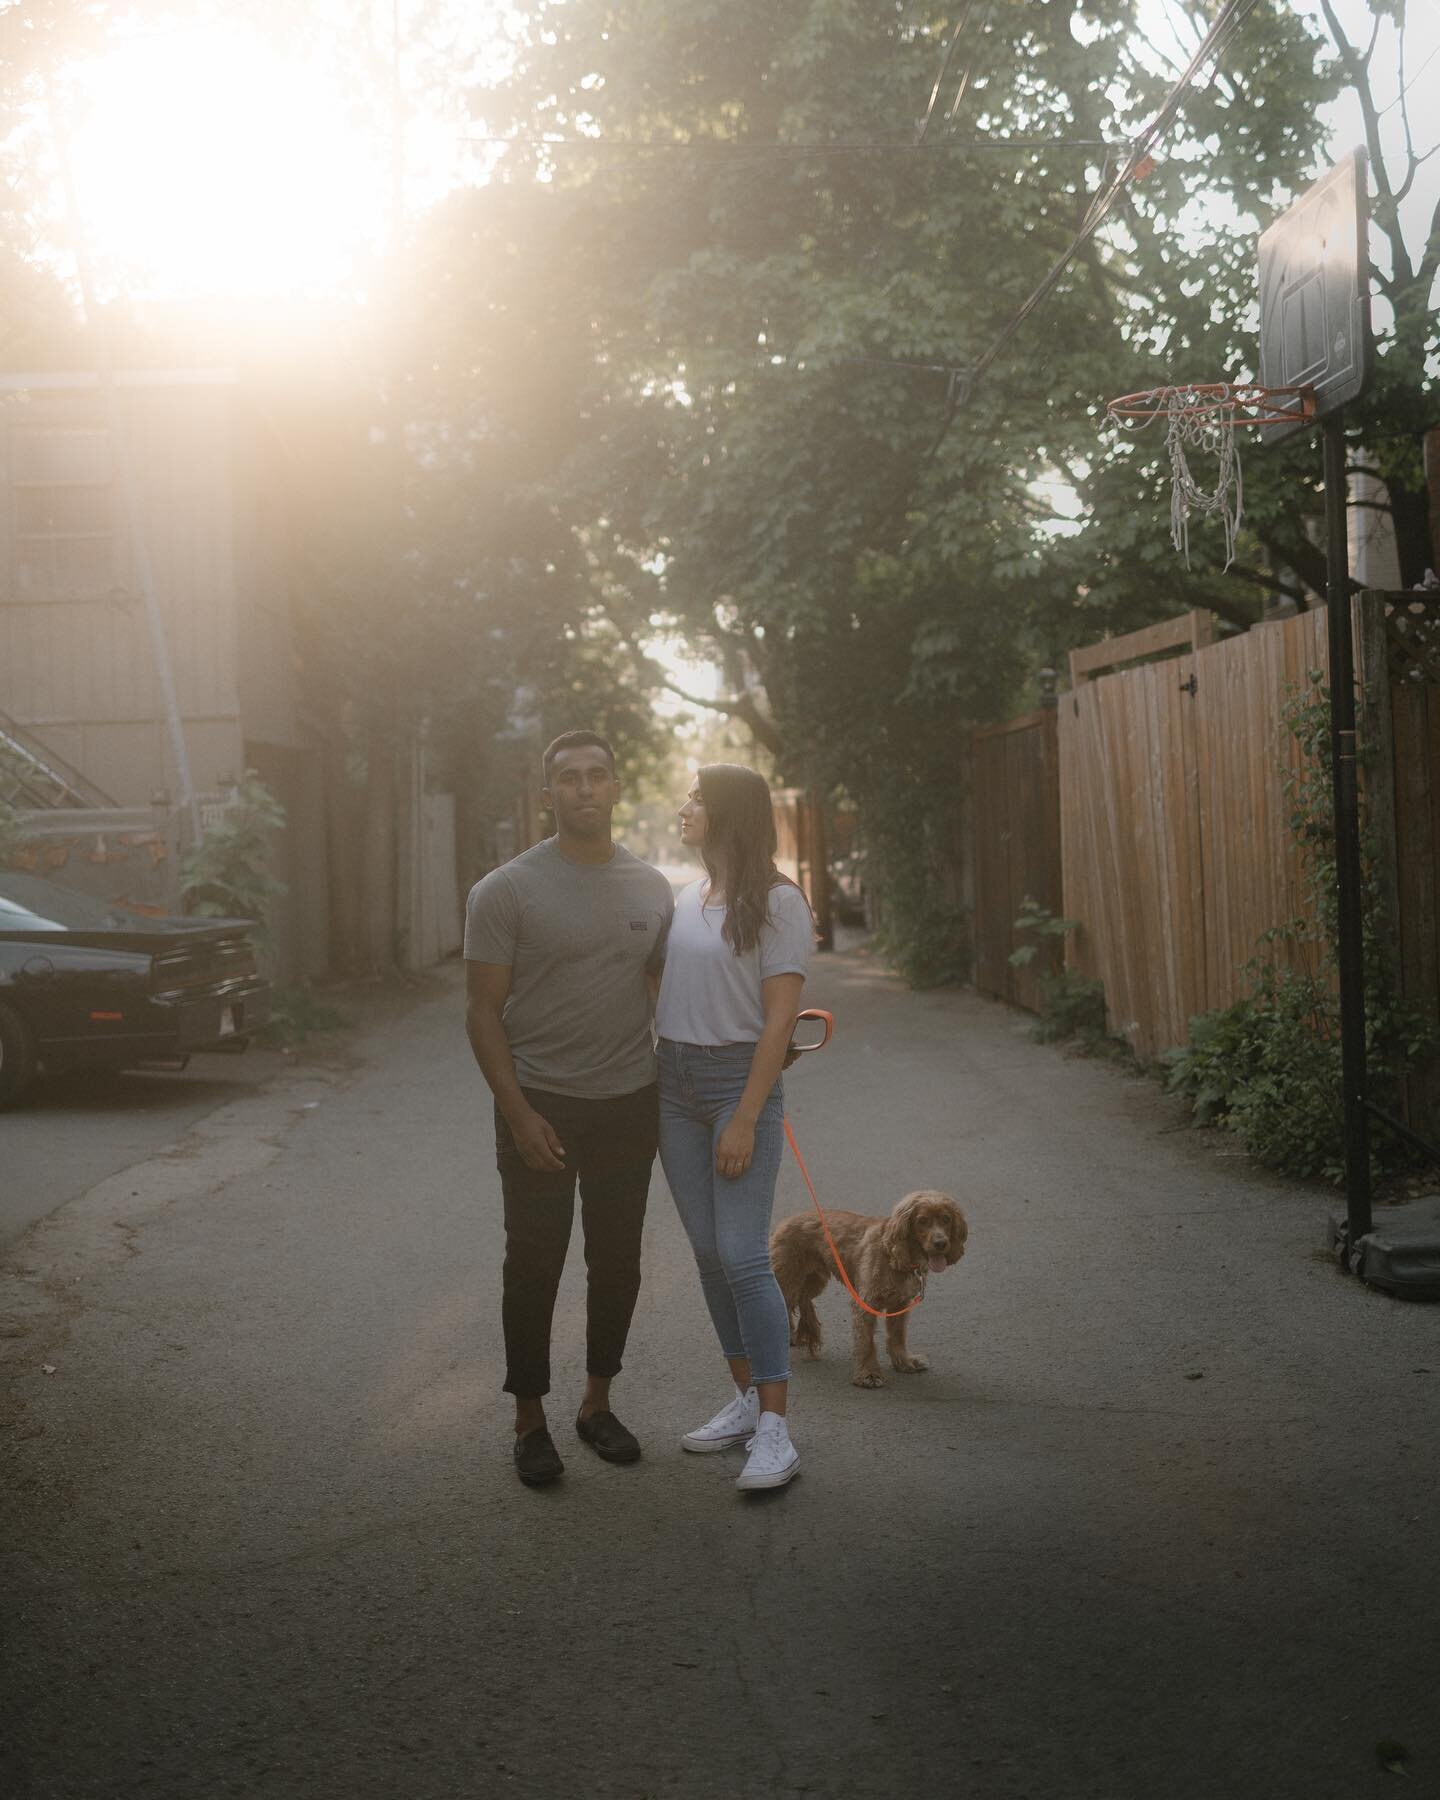 A walk in their neighborhood, through the animated alleys of Villeray.
Met their sweet baby Lorenzo, the cutest dog in town! See more of this romance on my stories ! 
FR} Une marche dans leur quartier, dans les jolies ruelles anim&eacute;es de Viller